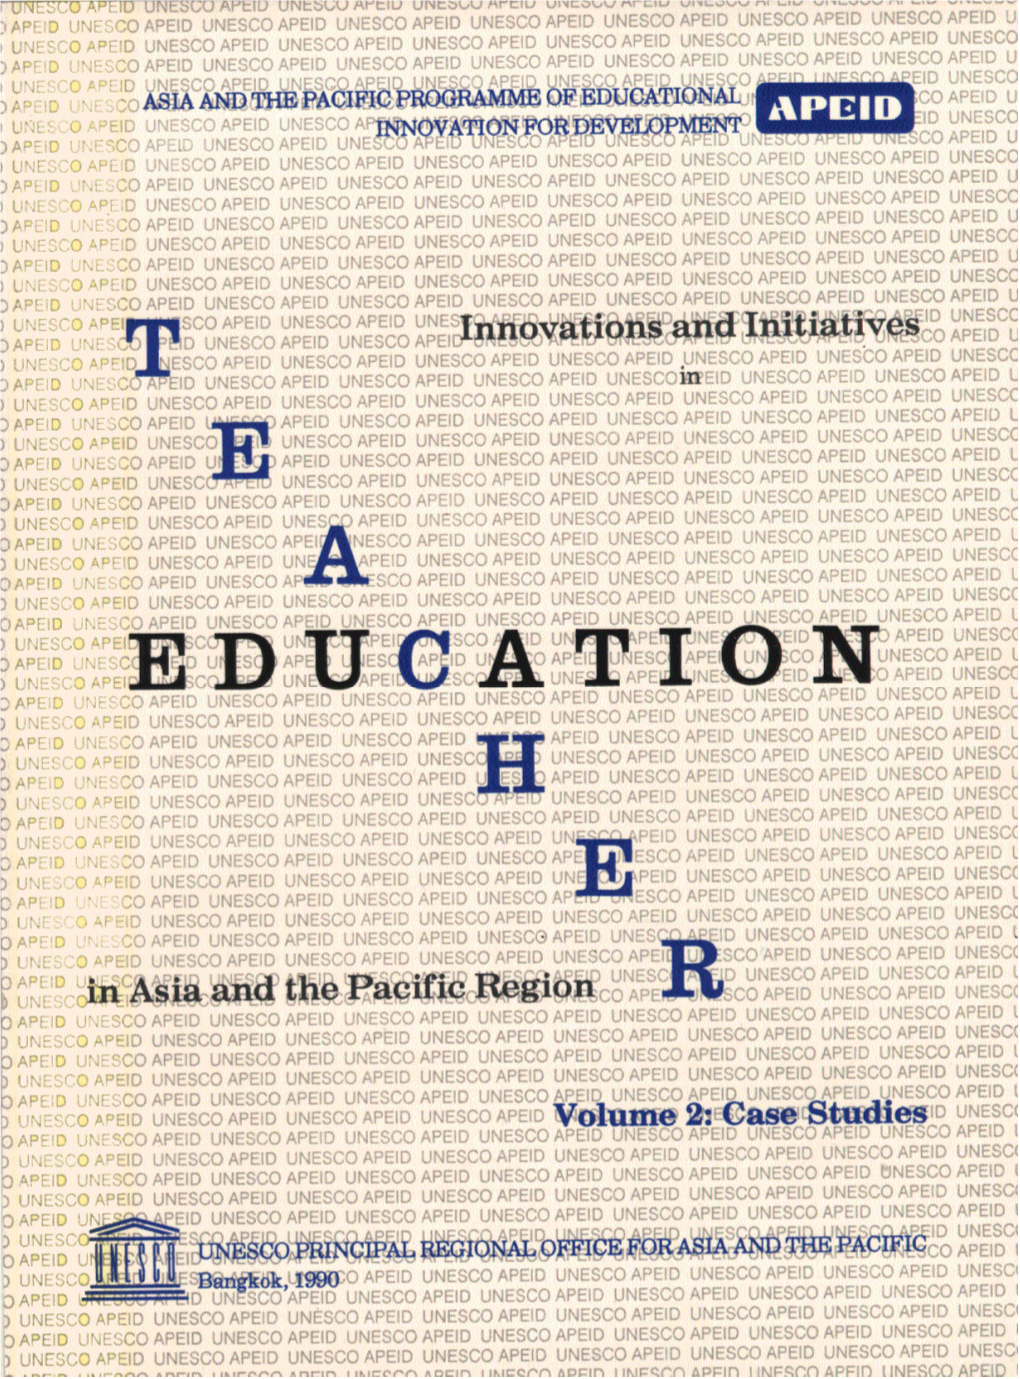 Teacher Education in Asia and the Pacific Region